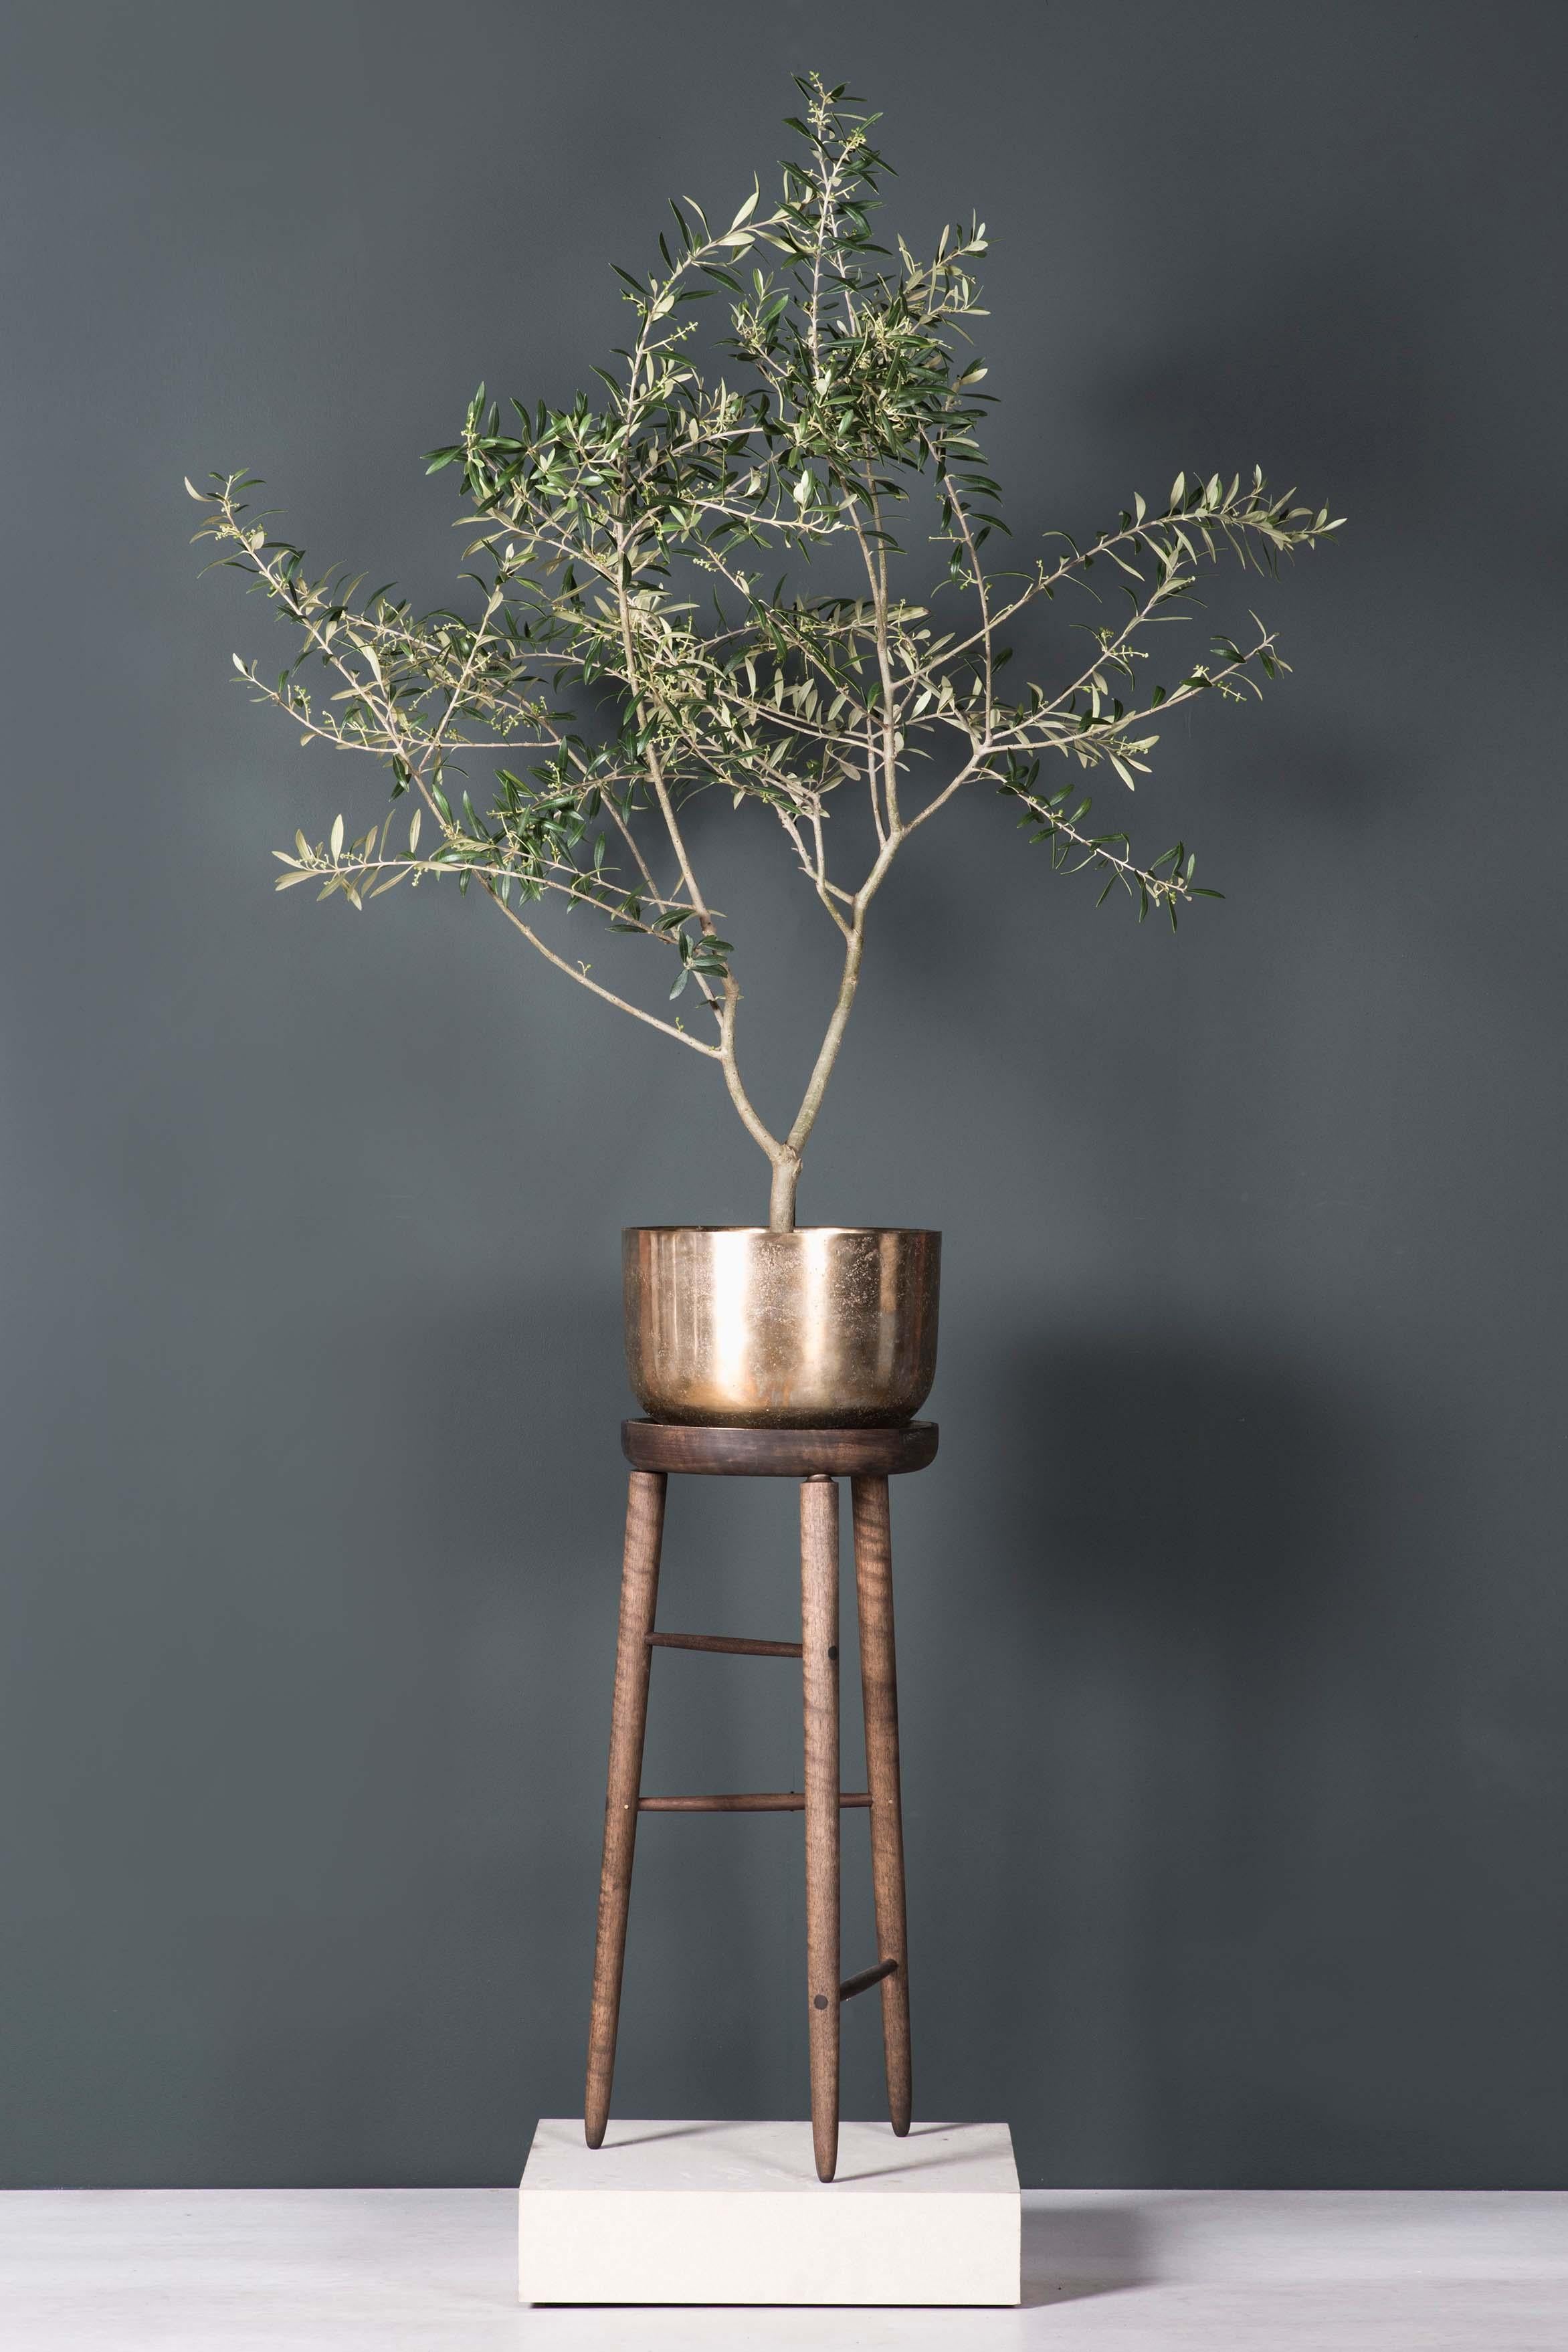 The Baré Tall Planter is part of family of objects designed around the act of indoor horticulture. Named after Jeanne Baré, the first woman to circumnavigate the globe - each object in the series provides an elegant, elevated home for your